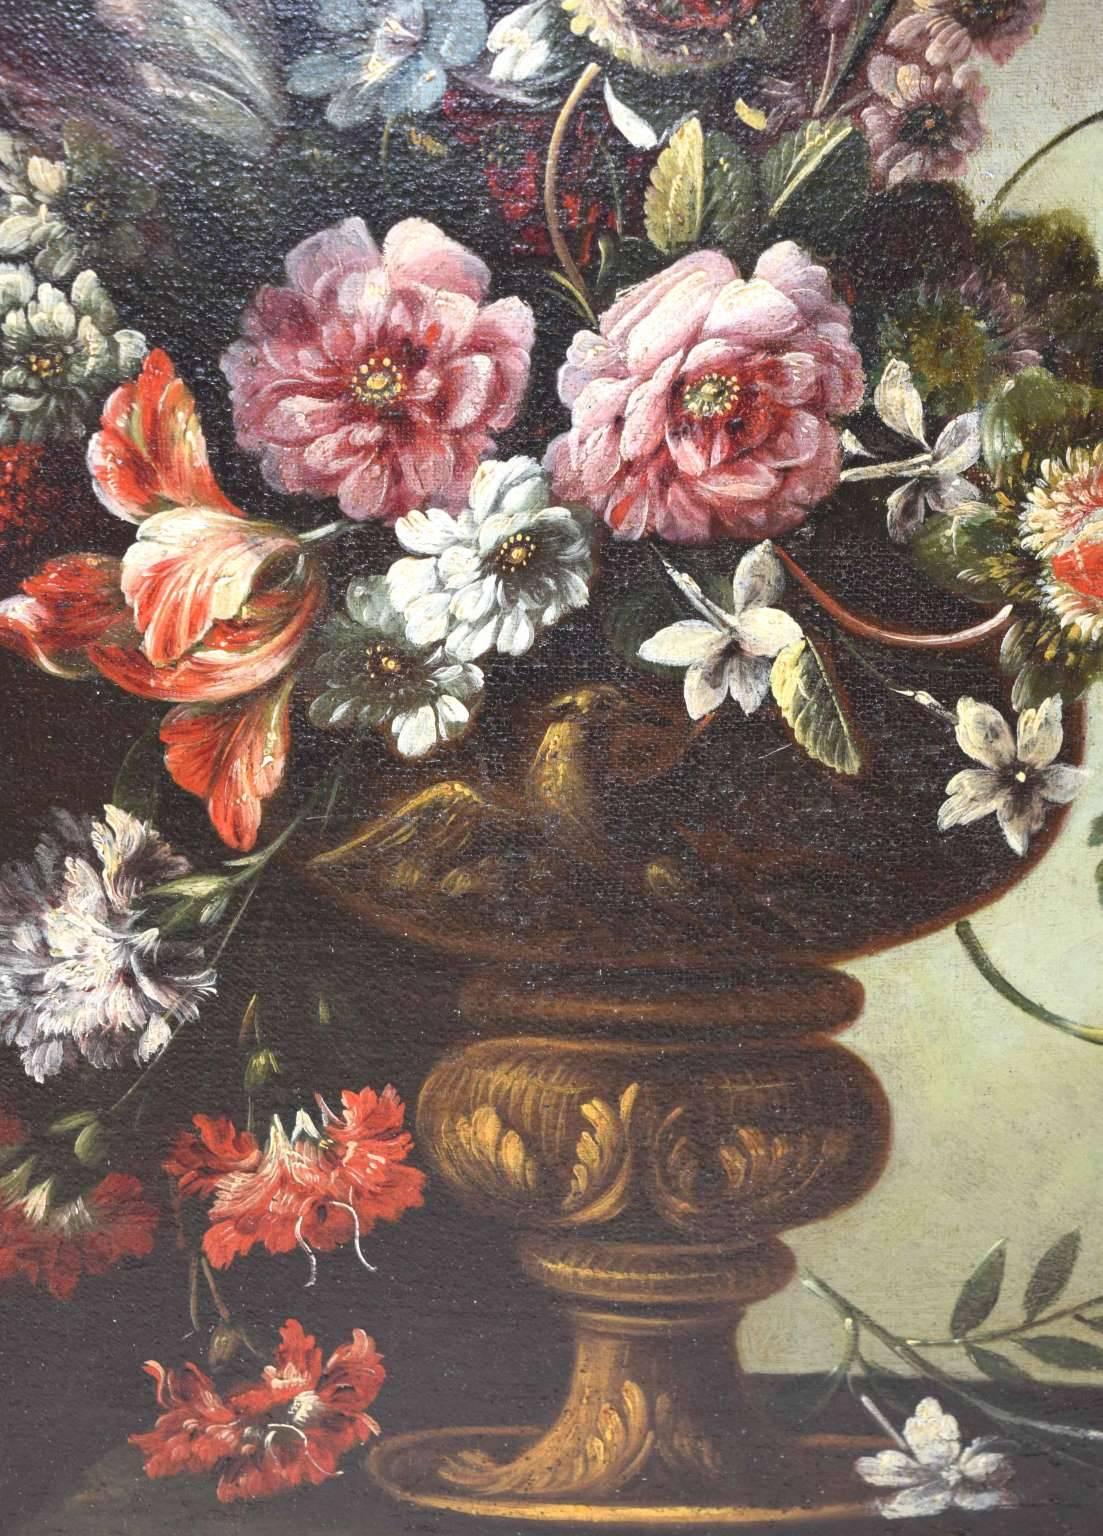 Superb Pair of 18th Century Flemish Floral Still Life Paintings, circa 1760 In Good Condition For Sale In Houston, TX